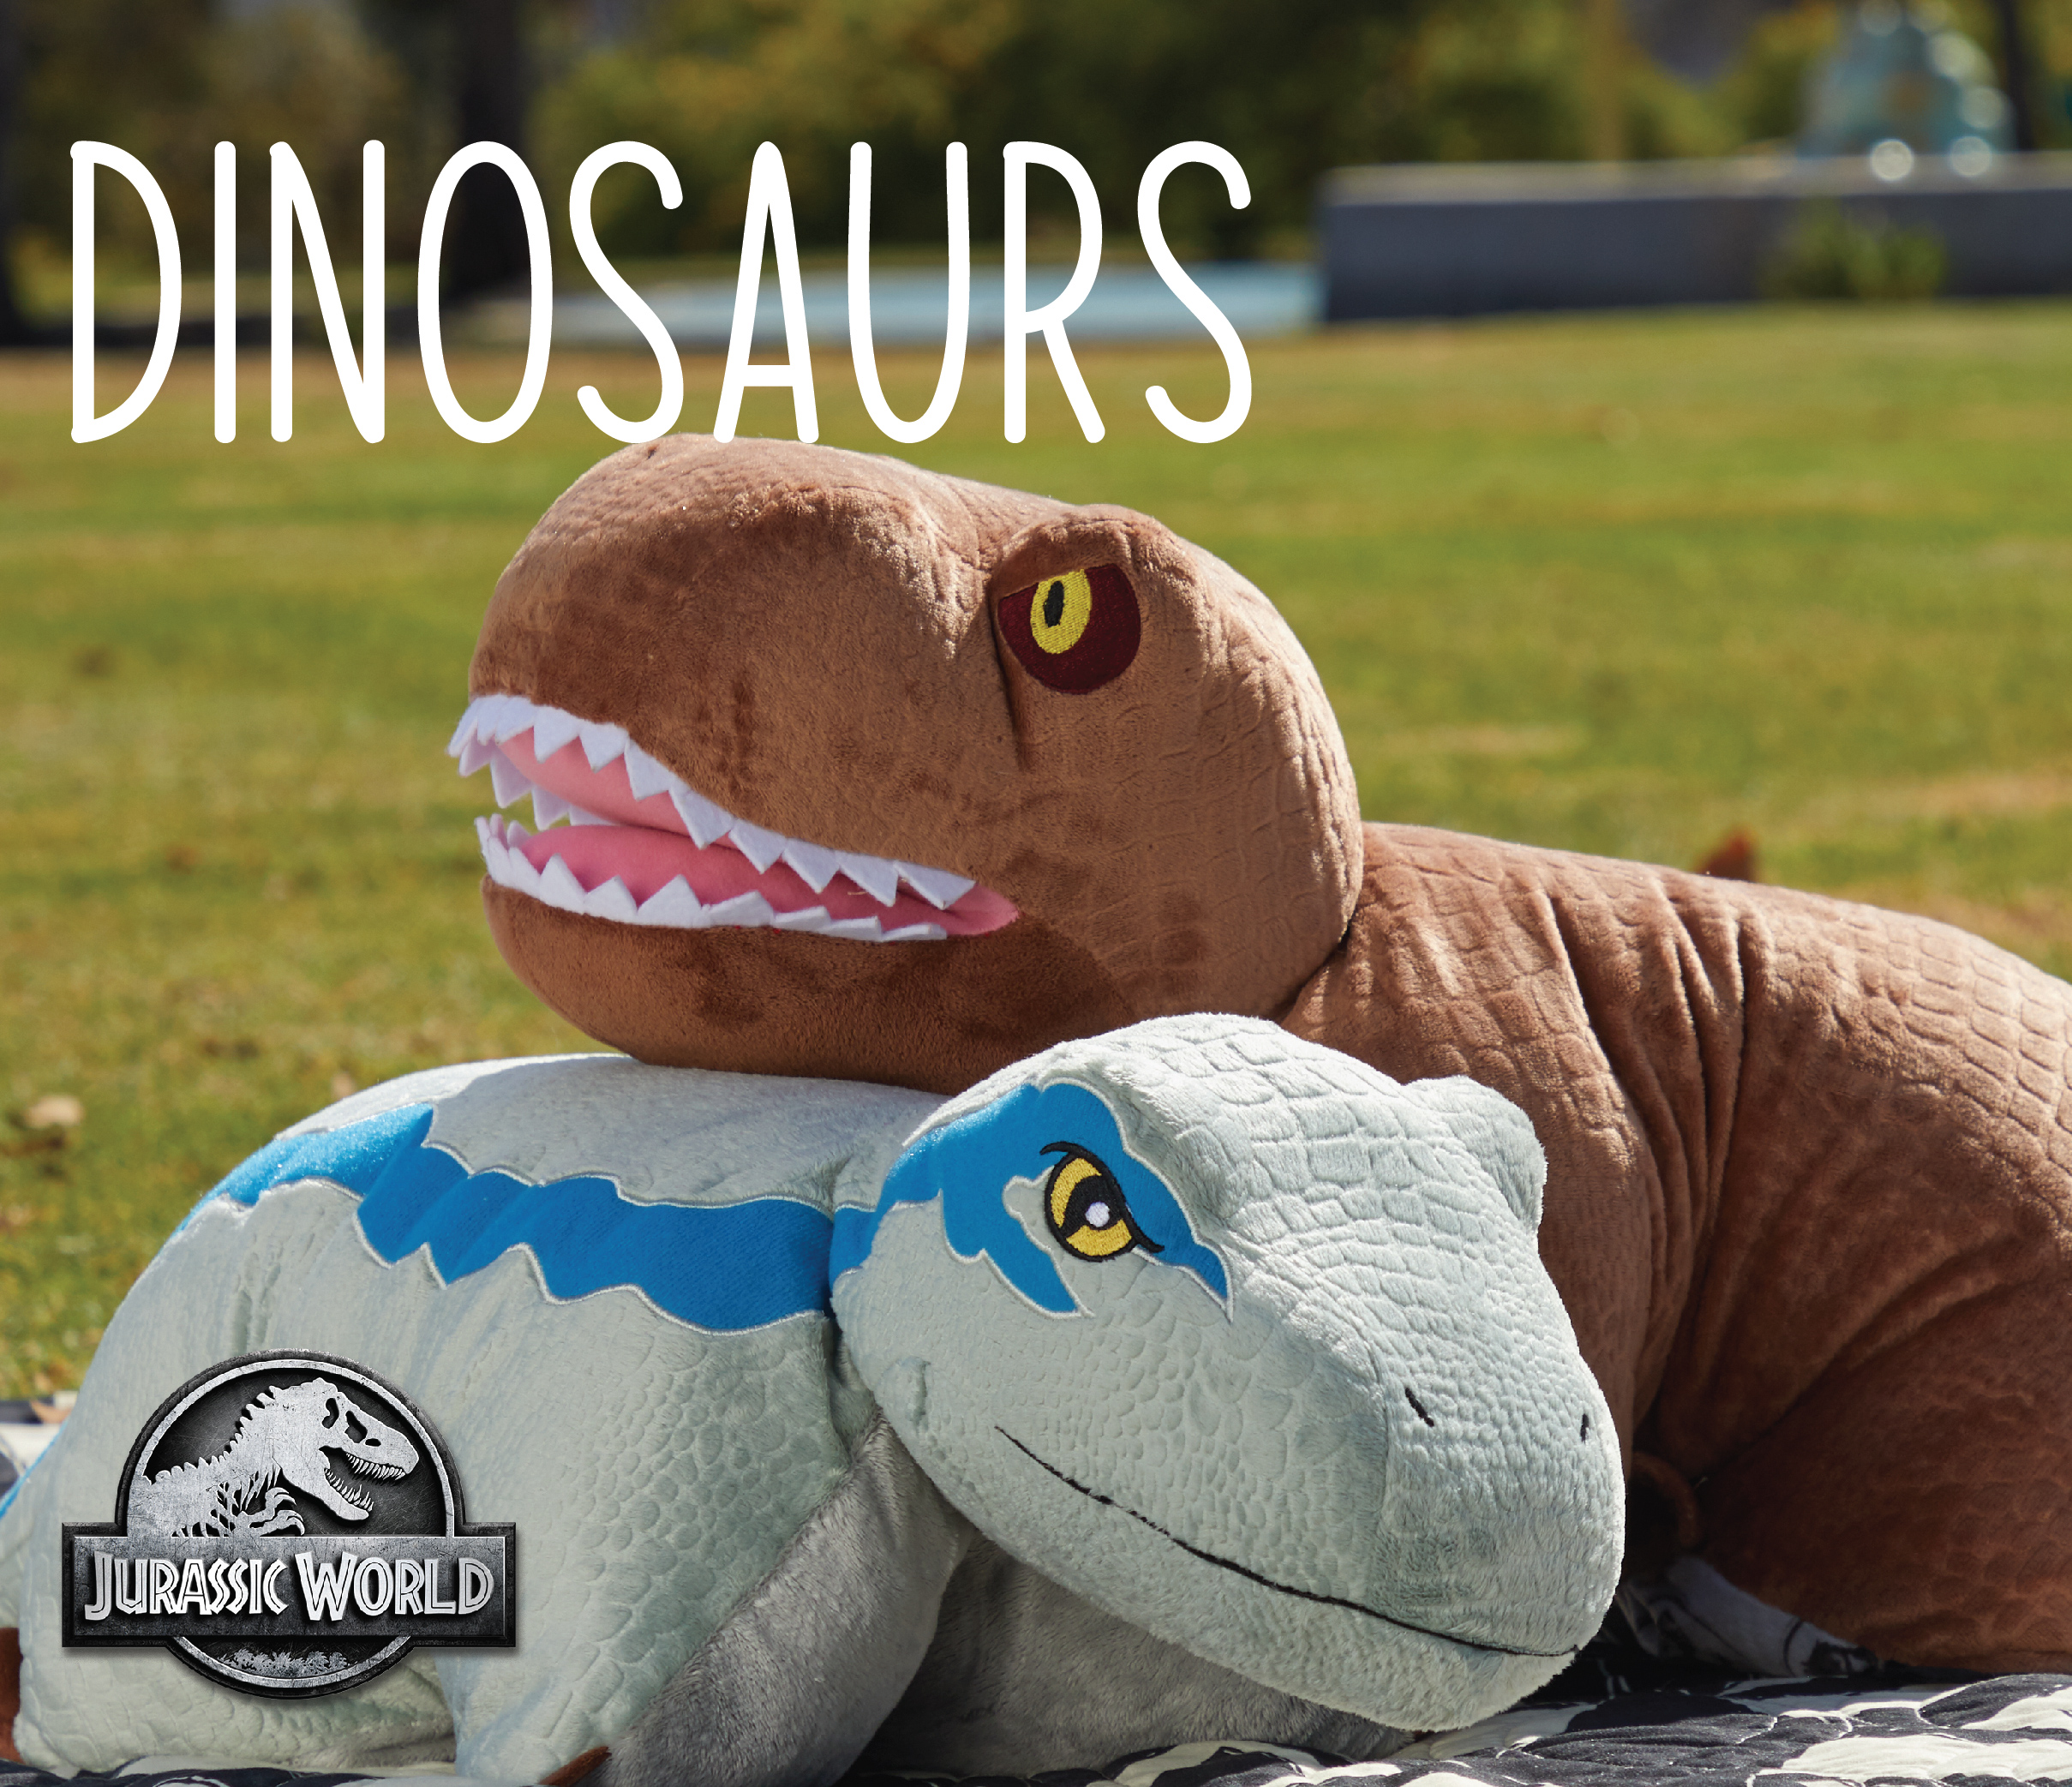 Click here to view Dinosaur Pillow Pets, highlighting the Universal Studios Jurassic World Blue Velociraptor and brown Trex Dinosaur Pillow Pets.